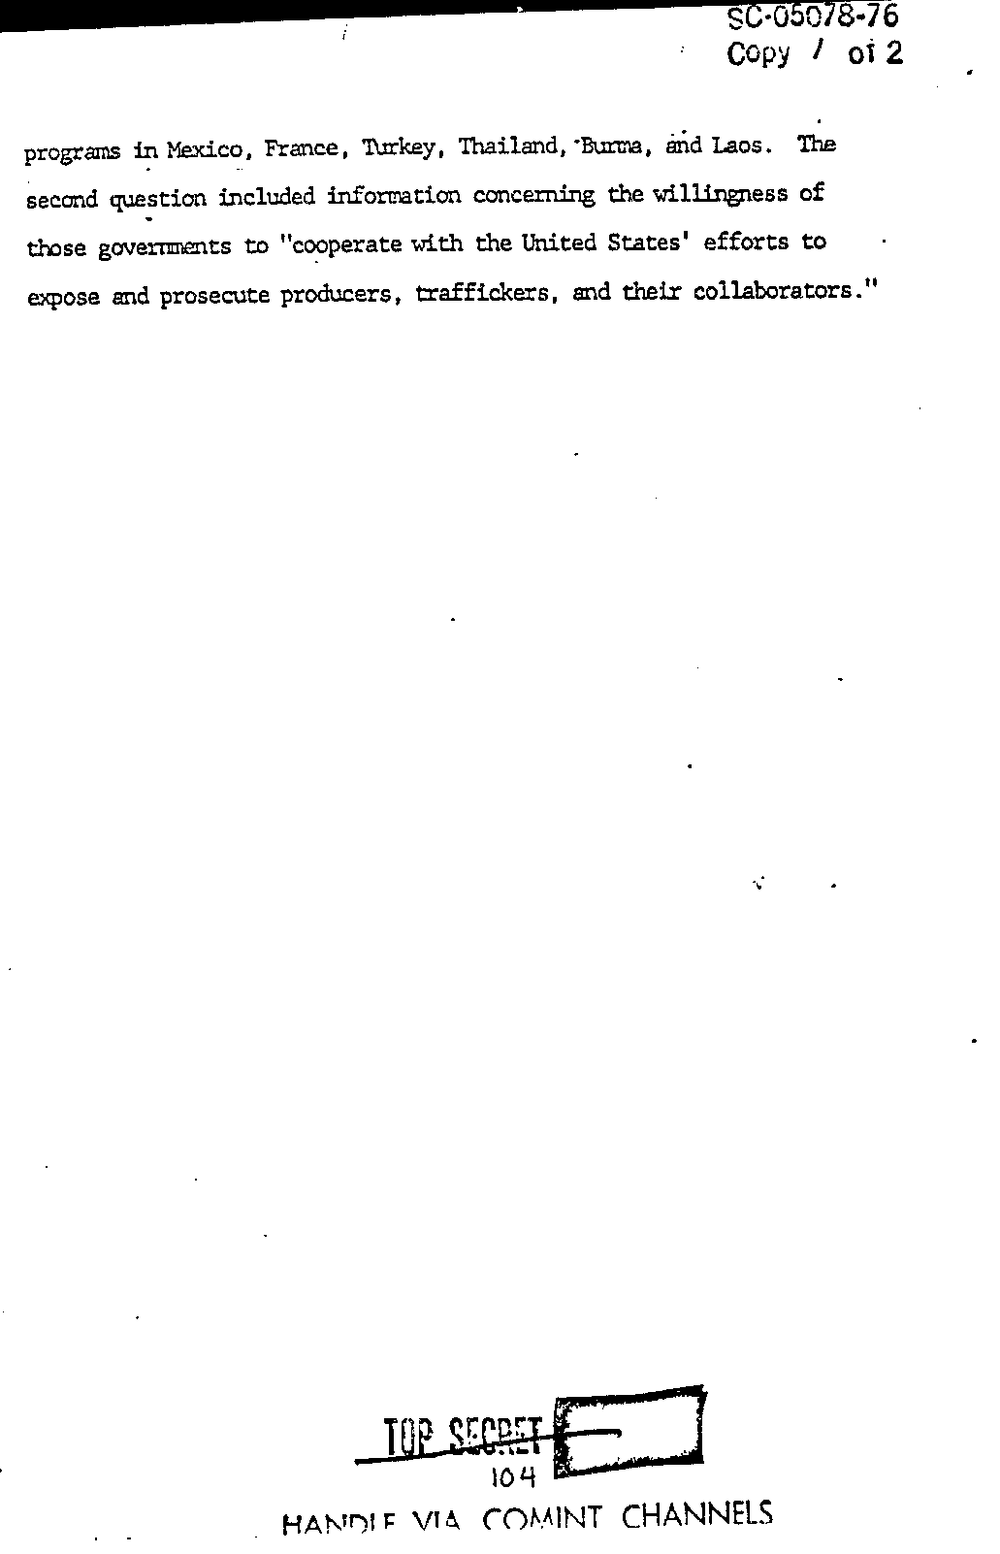 Page 112 from Report on Inquiry Into CIA Related Electronic Surveillance Activities